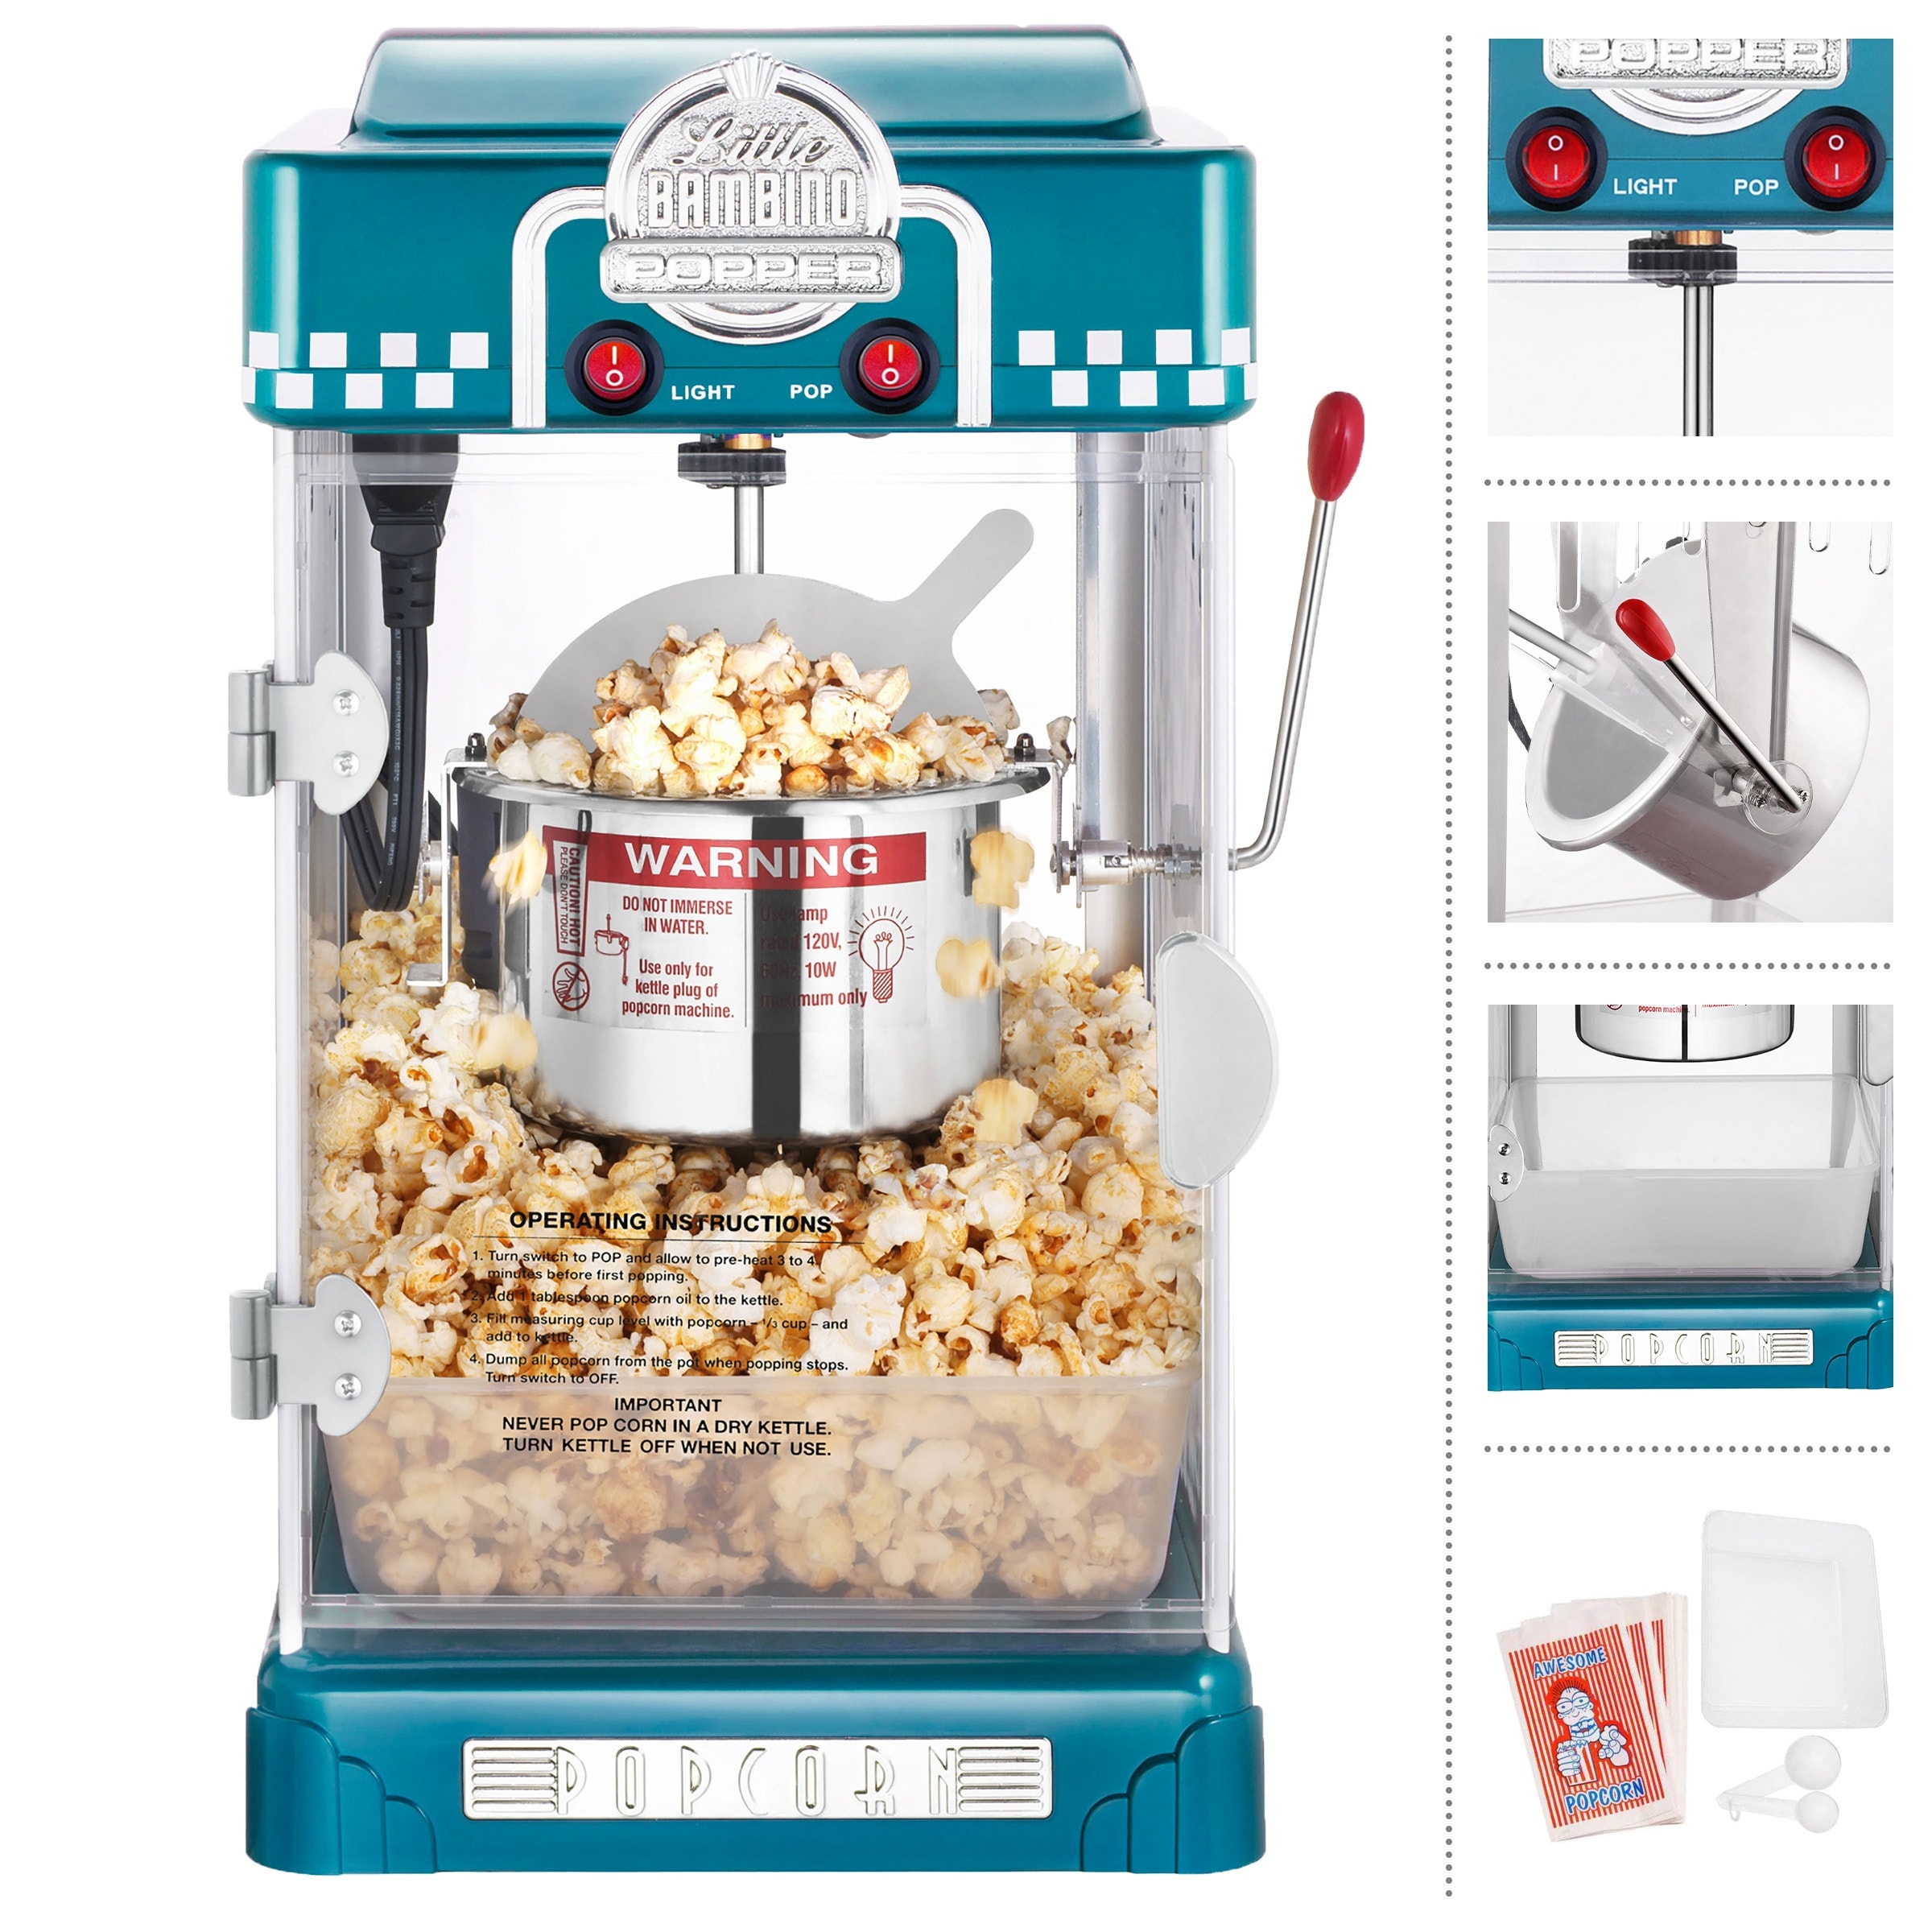 https://ak1.ostkcdn.com/images/products/is/images/direct/1fa66ad1c2672509c9a9490363376710c37ff6b3/Little-Bambino-Countertop-Popcorn-Machine-%E2%80%93-2.5oz-Kettle-with-Measuring-Spoon%2C-Scoop%2C-and-25-Serving-Bags-%28Blue%29.jpg